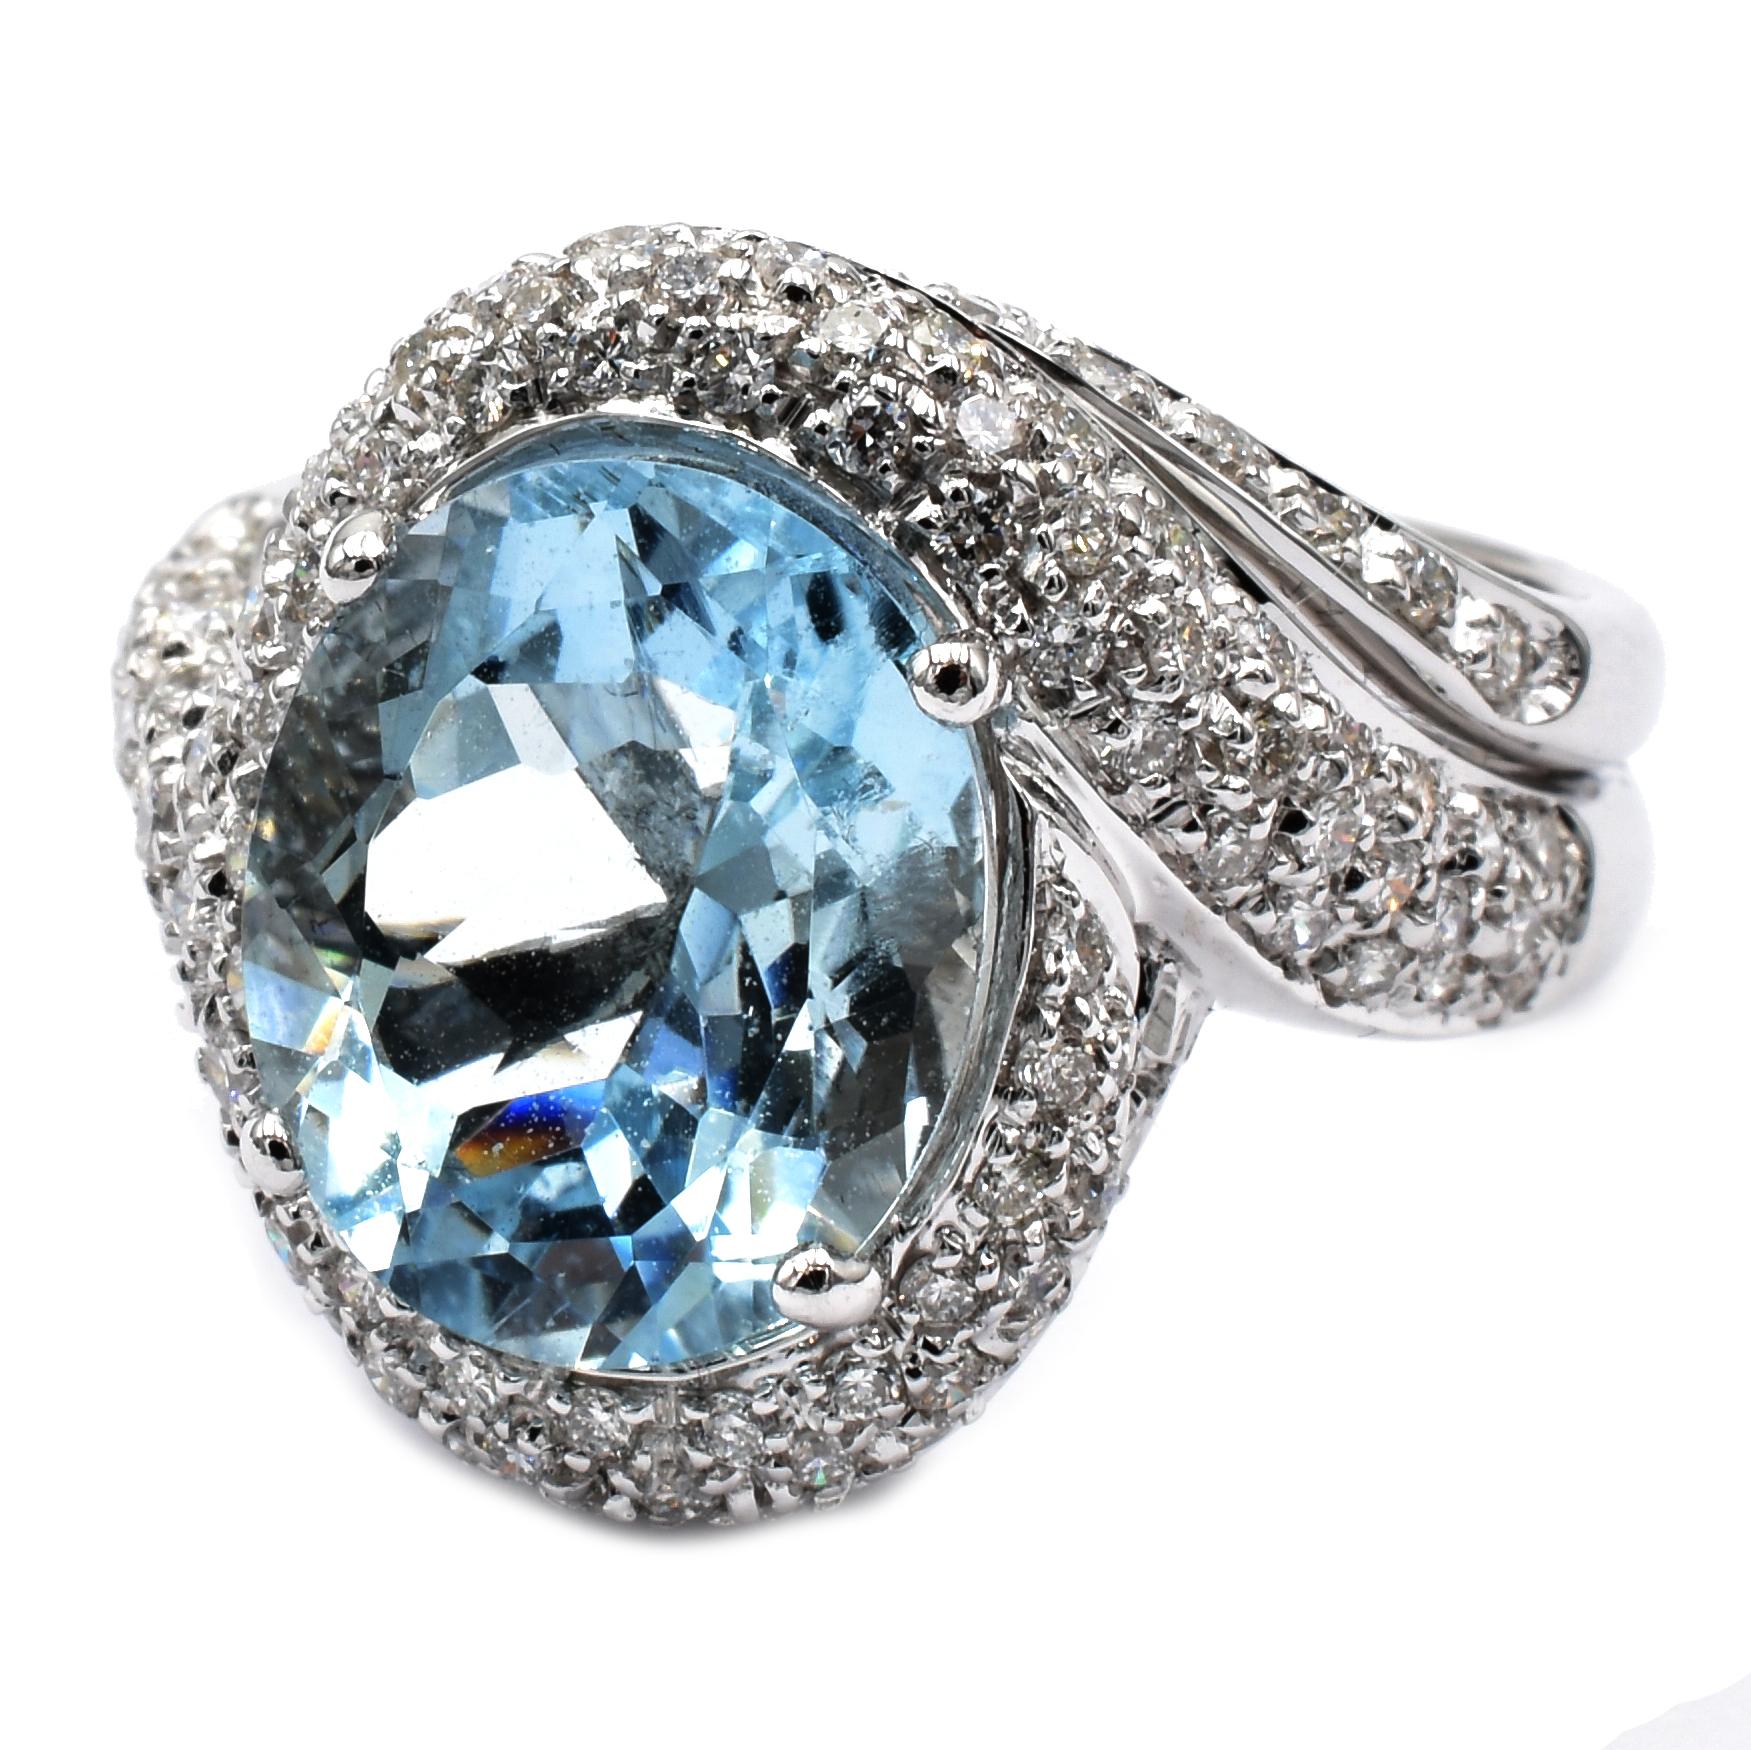 Gilberto Cassola 18Kt White Gold Ring with Oval Shaped Brilliant Cut Aquamarine and Diamonds.
Handmade in our Atelier in Valenza Italy.
Oval Brilliant Cut Aquamarine mm 12x10 for a weight of ct 4.61. 
G Color Vs Clarity White Diamonds ct 0.95.
18Kt